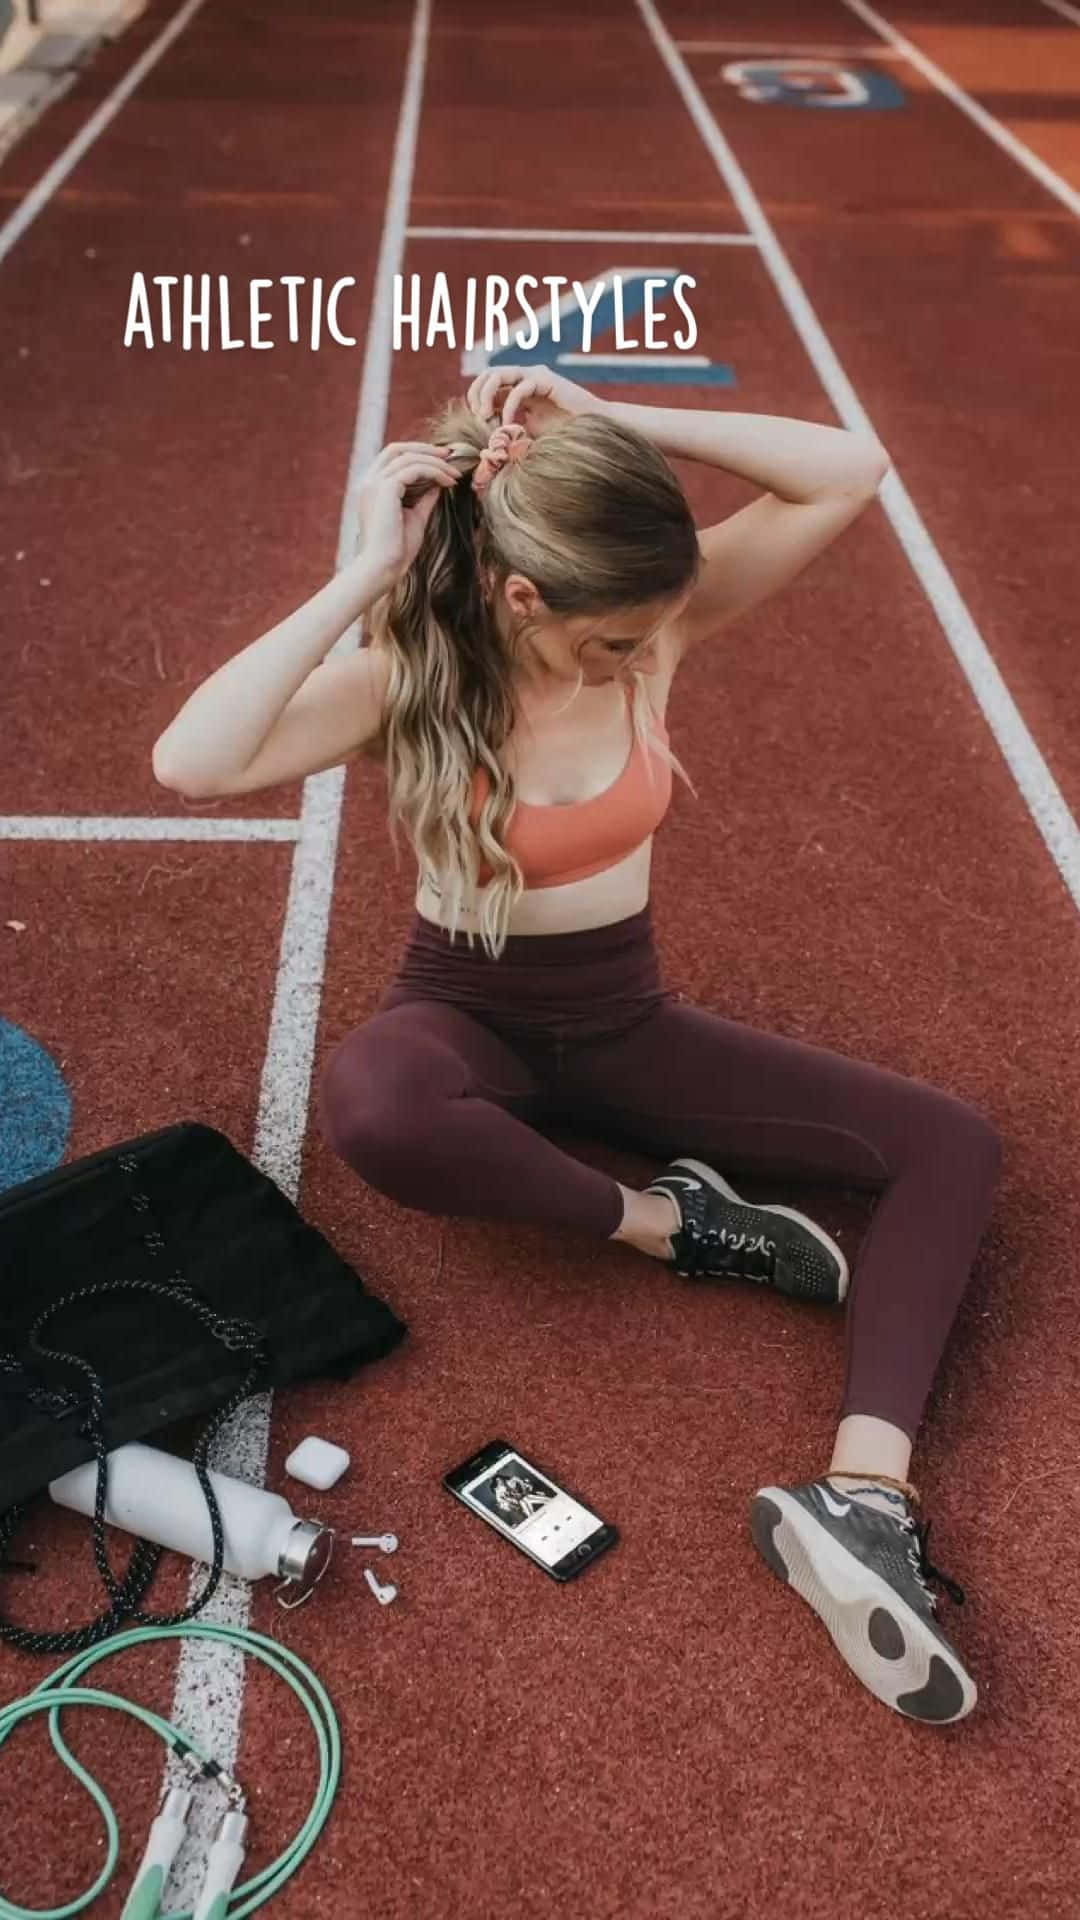 a woman sitting on a track with her phone and a hair clip Wallpaper